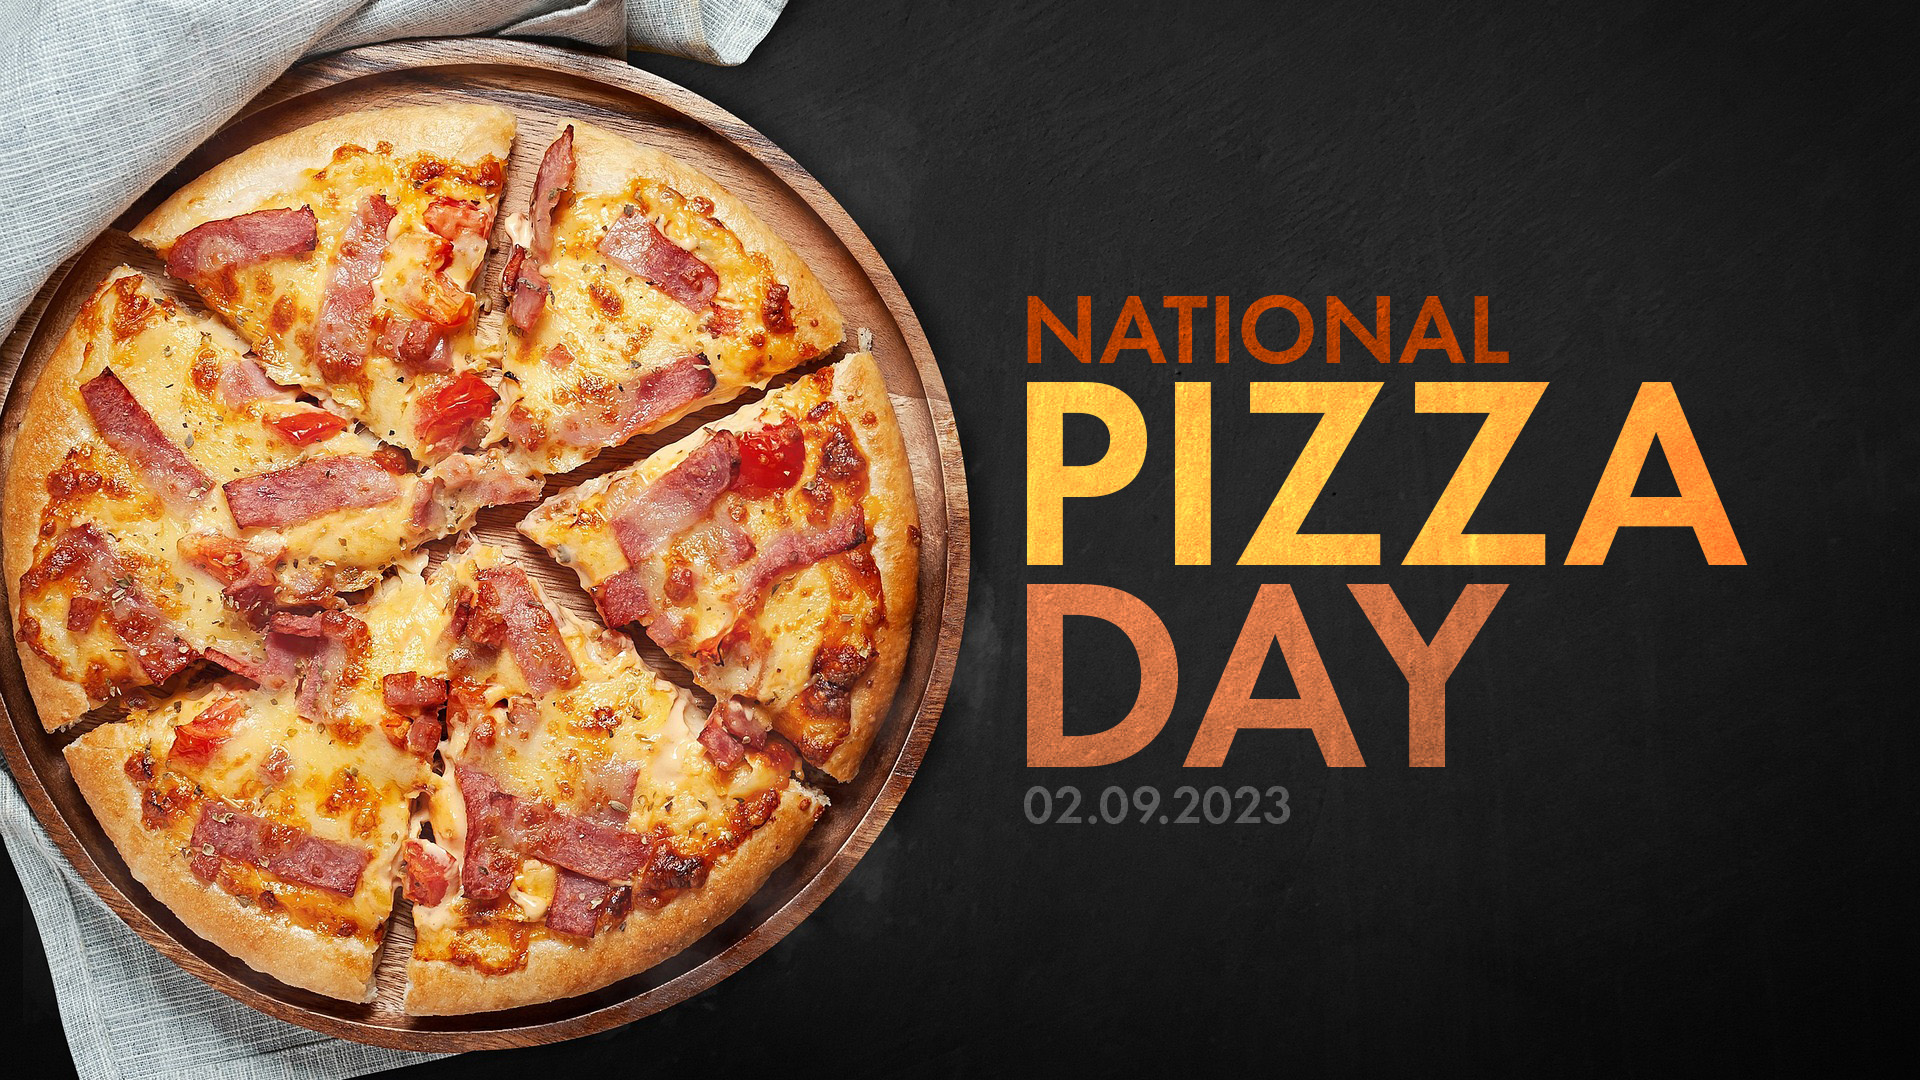 Ham, cheese, and tomato pizza on a wood round with a black textured background. 'National Pizza Day' written in a bold sans serif font.